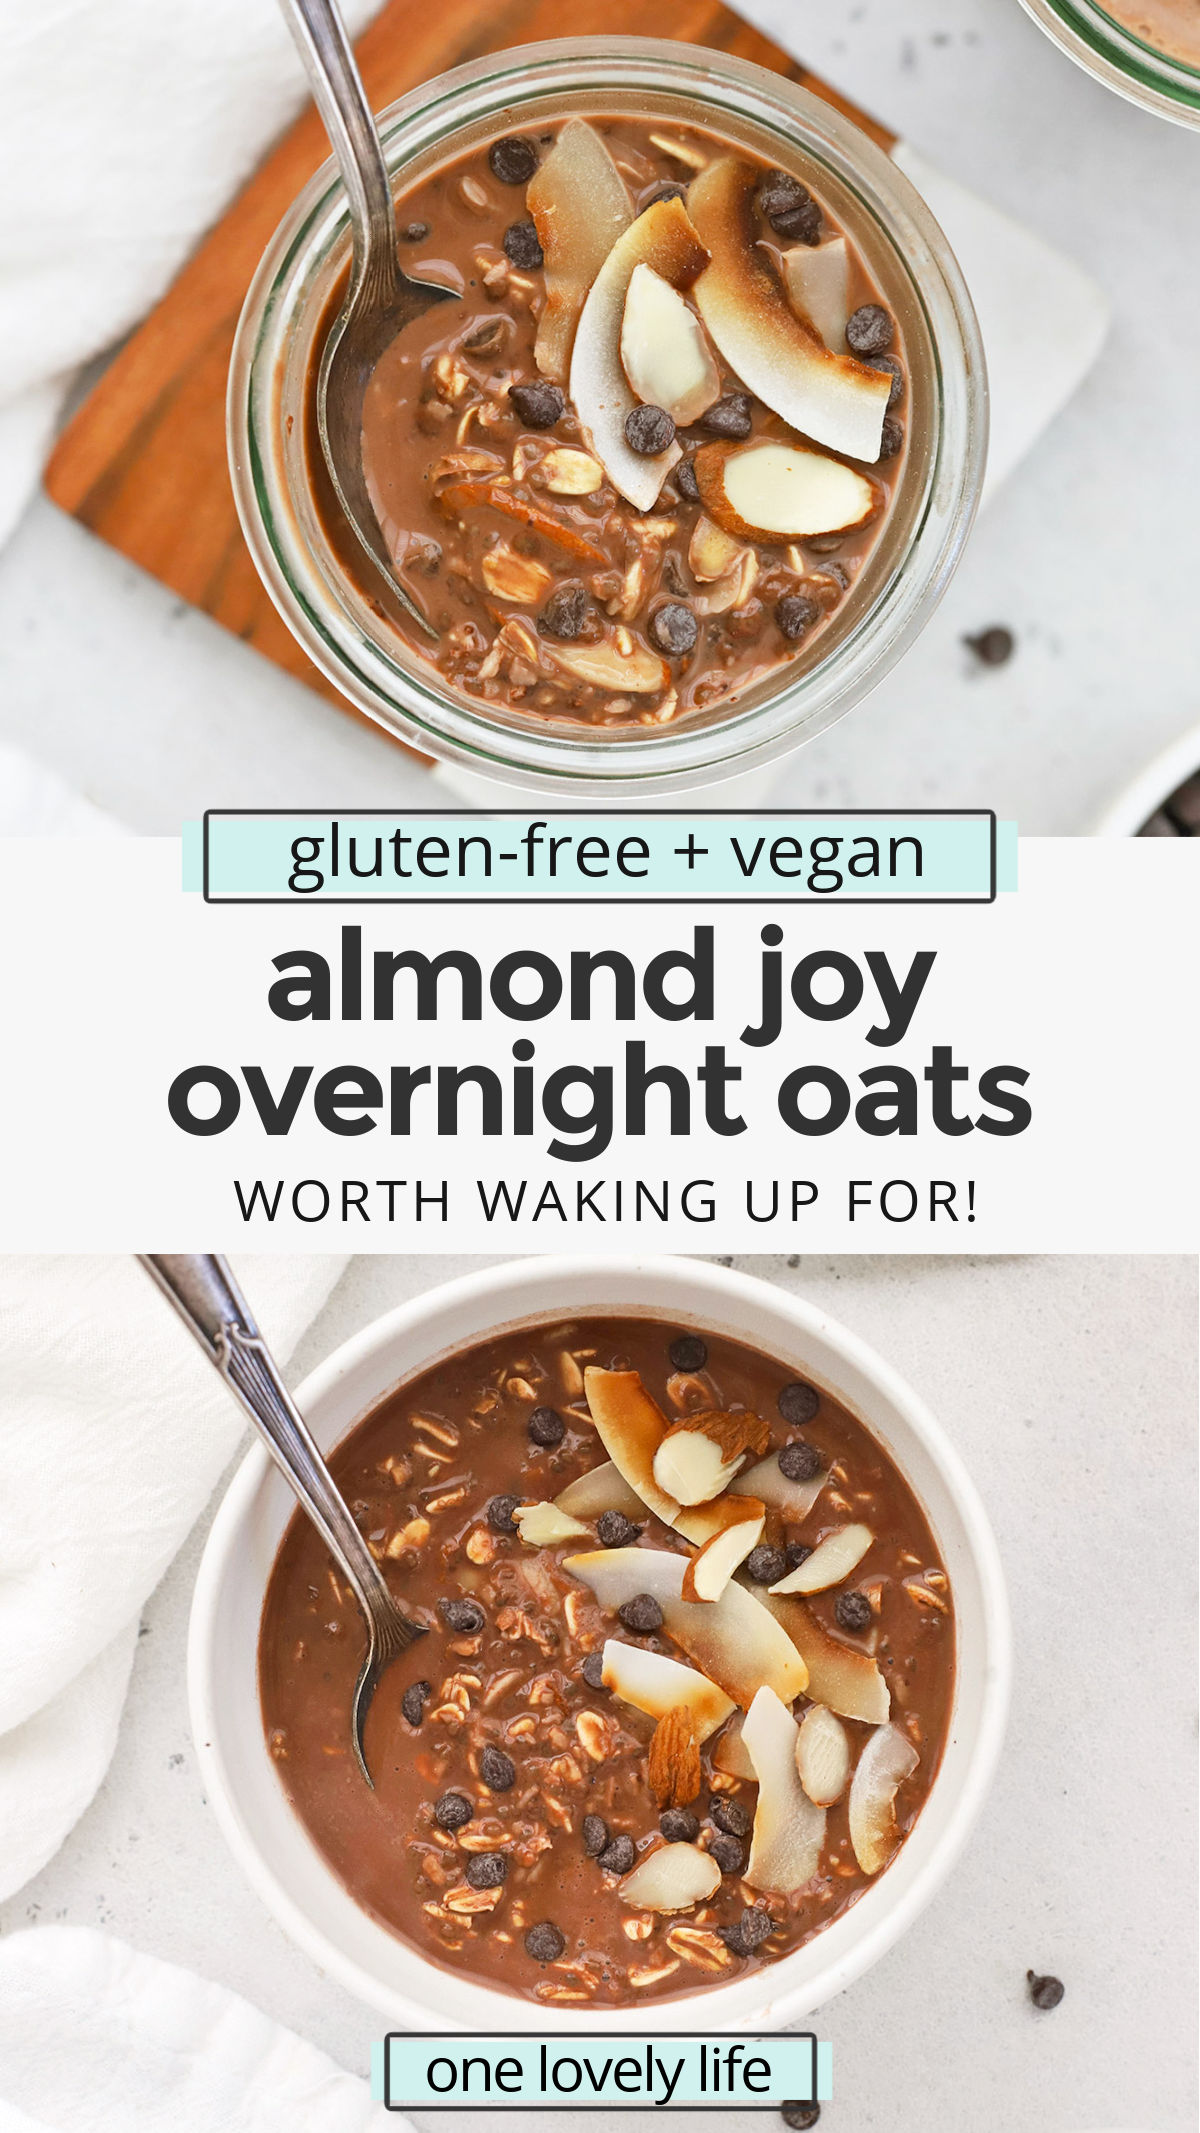 Almond Joy Overnight Oats - These creamy chocolate coconut overnight oats feel like such a treat to wake up to! (Vegan, Gluten-Free) // Healthy Breakfast // Vegan Breakfast // Gluten Free Breakfast // Chocolate Overnight Oats // Vegan Overnight Oats // chocolate overnight oats recipe